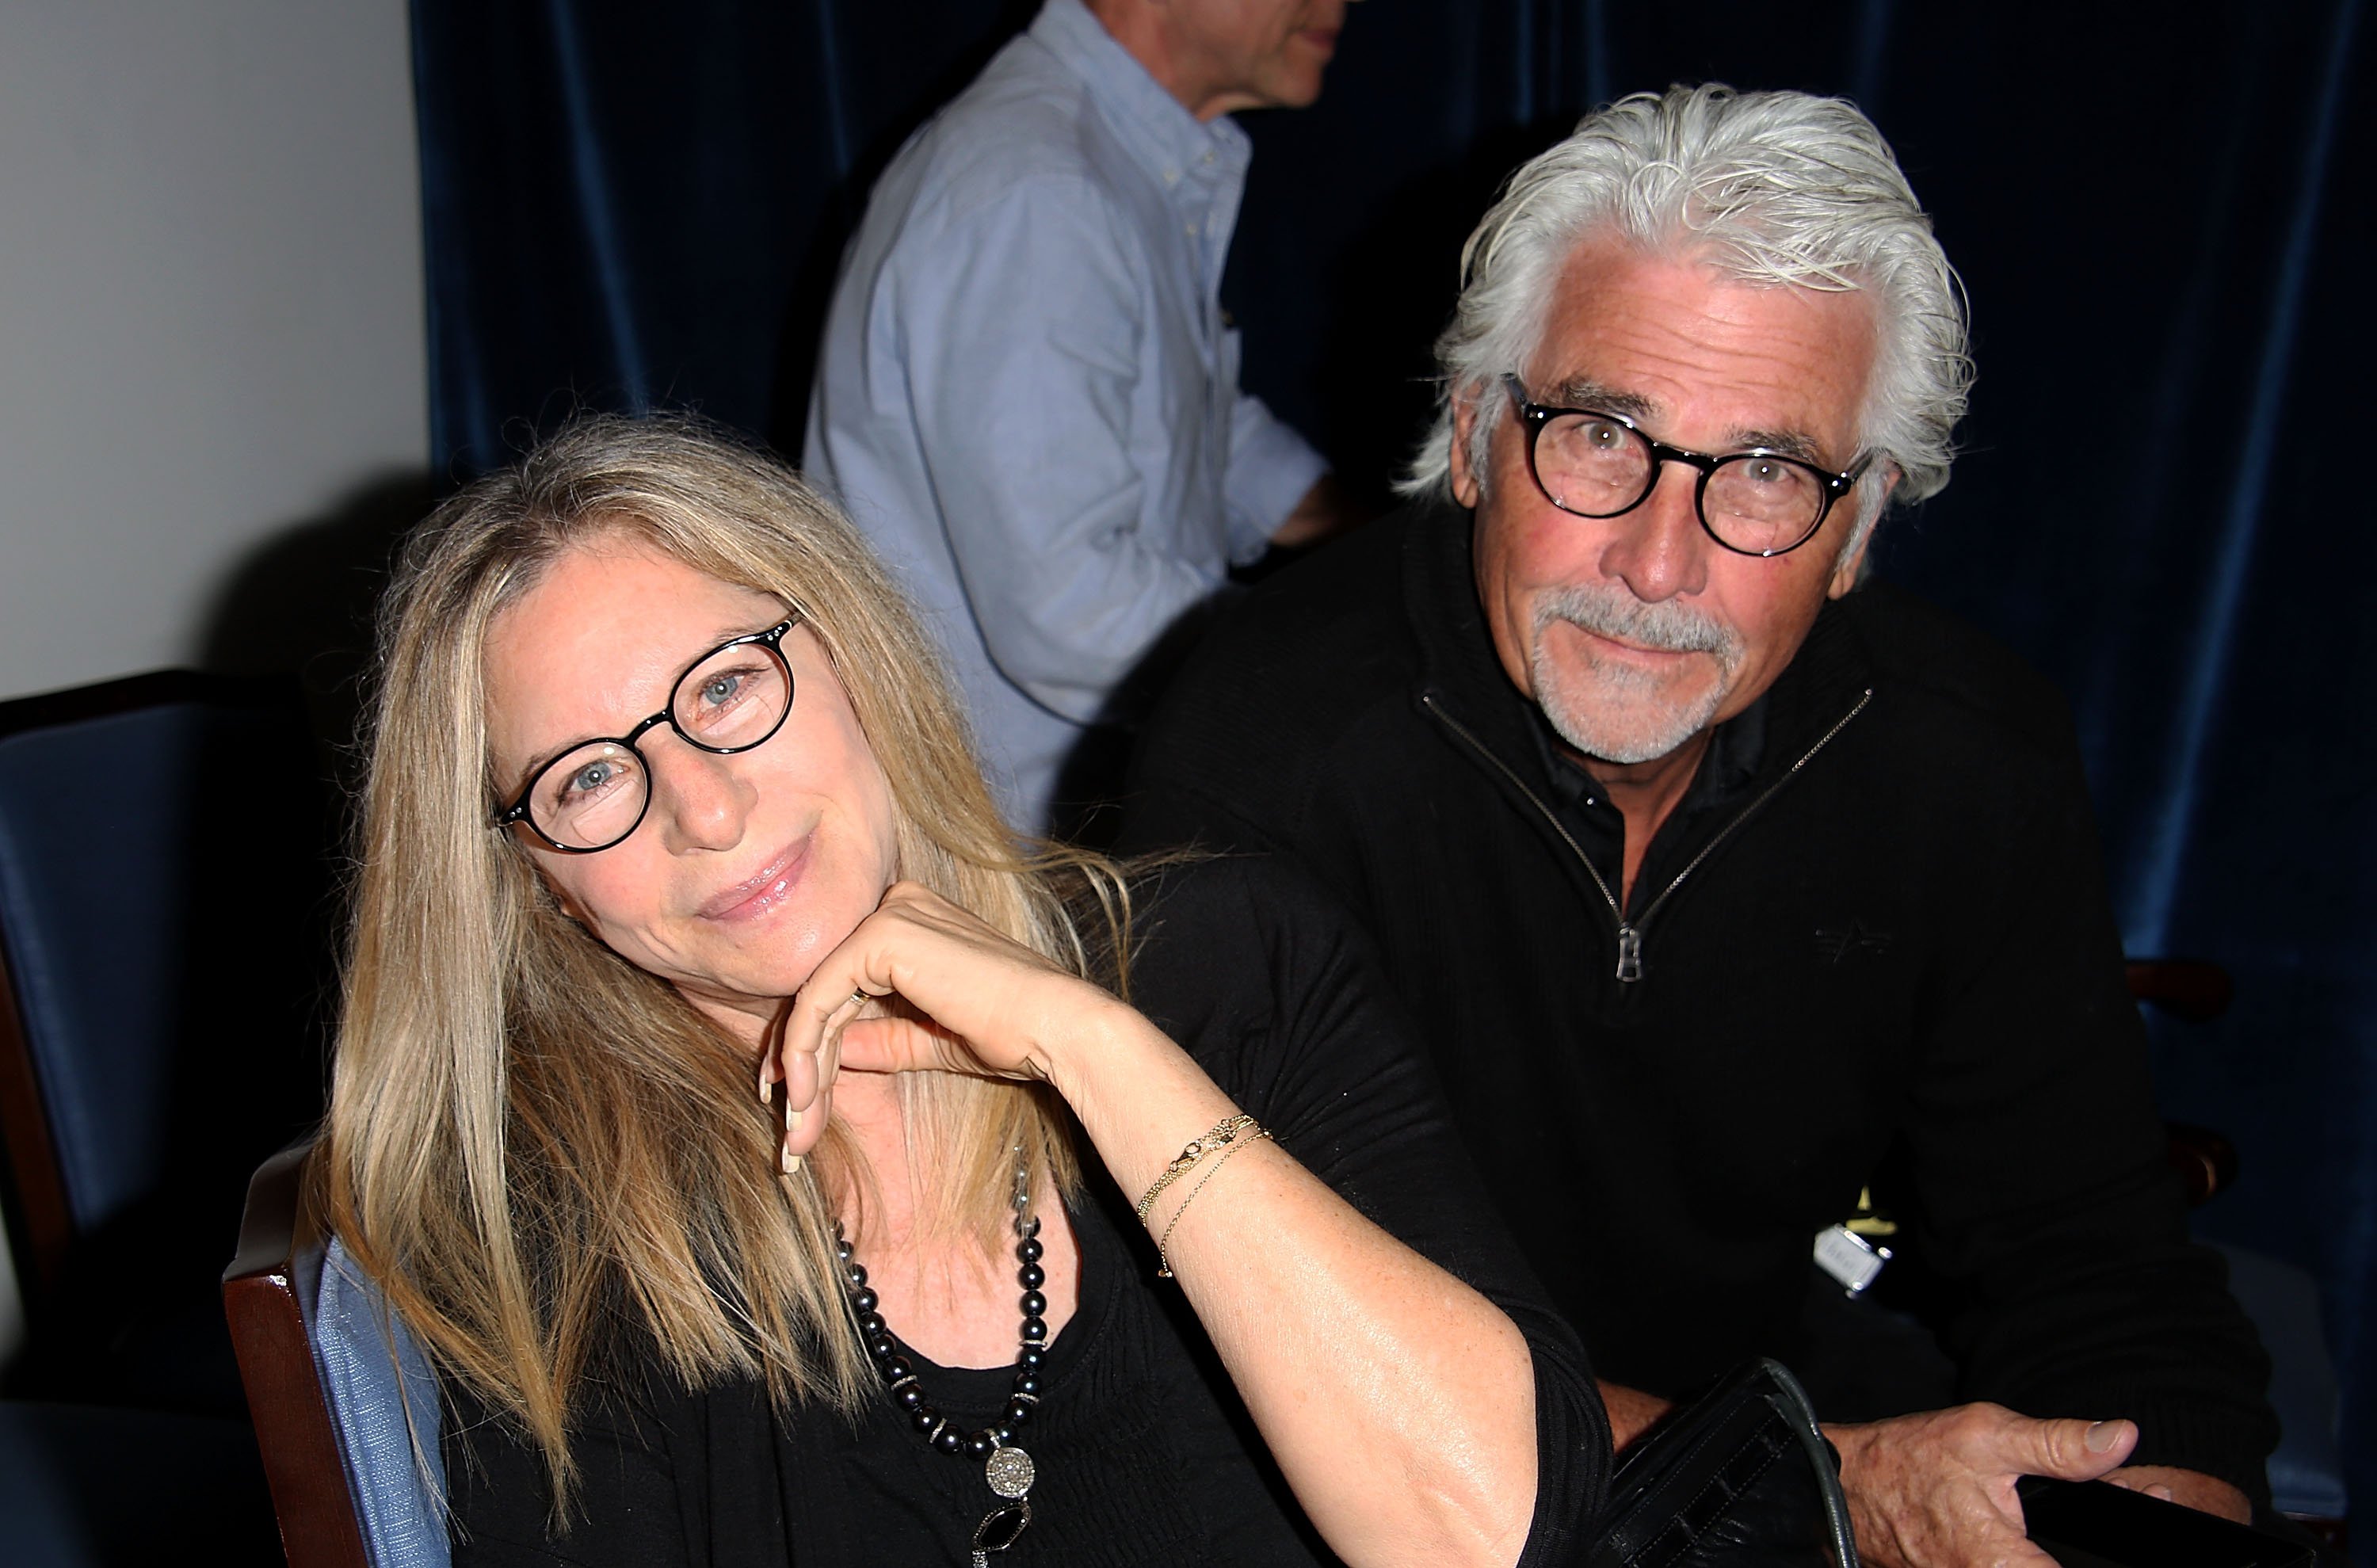 Barbra Streisand and James Brolin attend the "And So It Goes" premiere at Guild Hall on July 6, 2014  | Photo: GettyImages